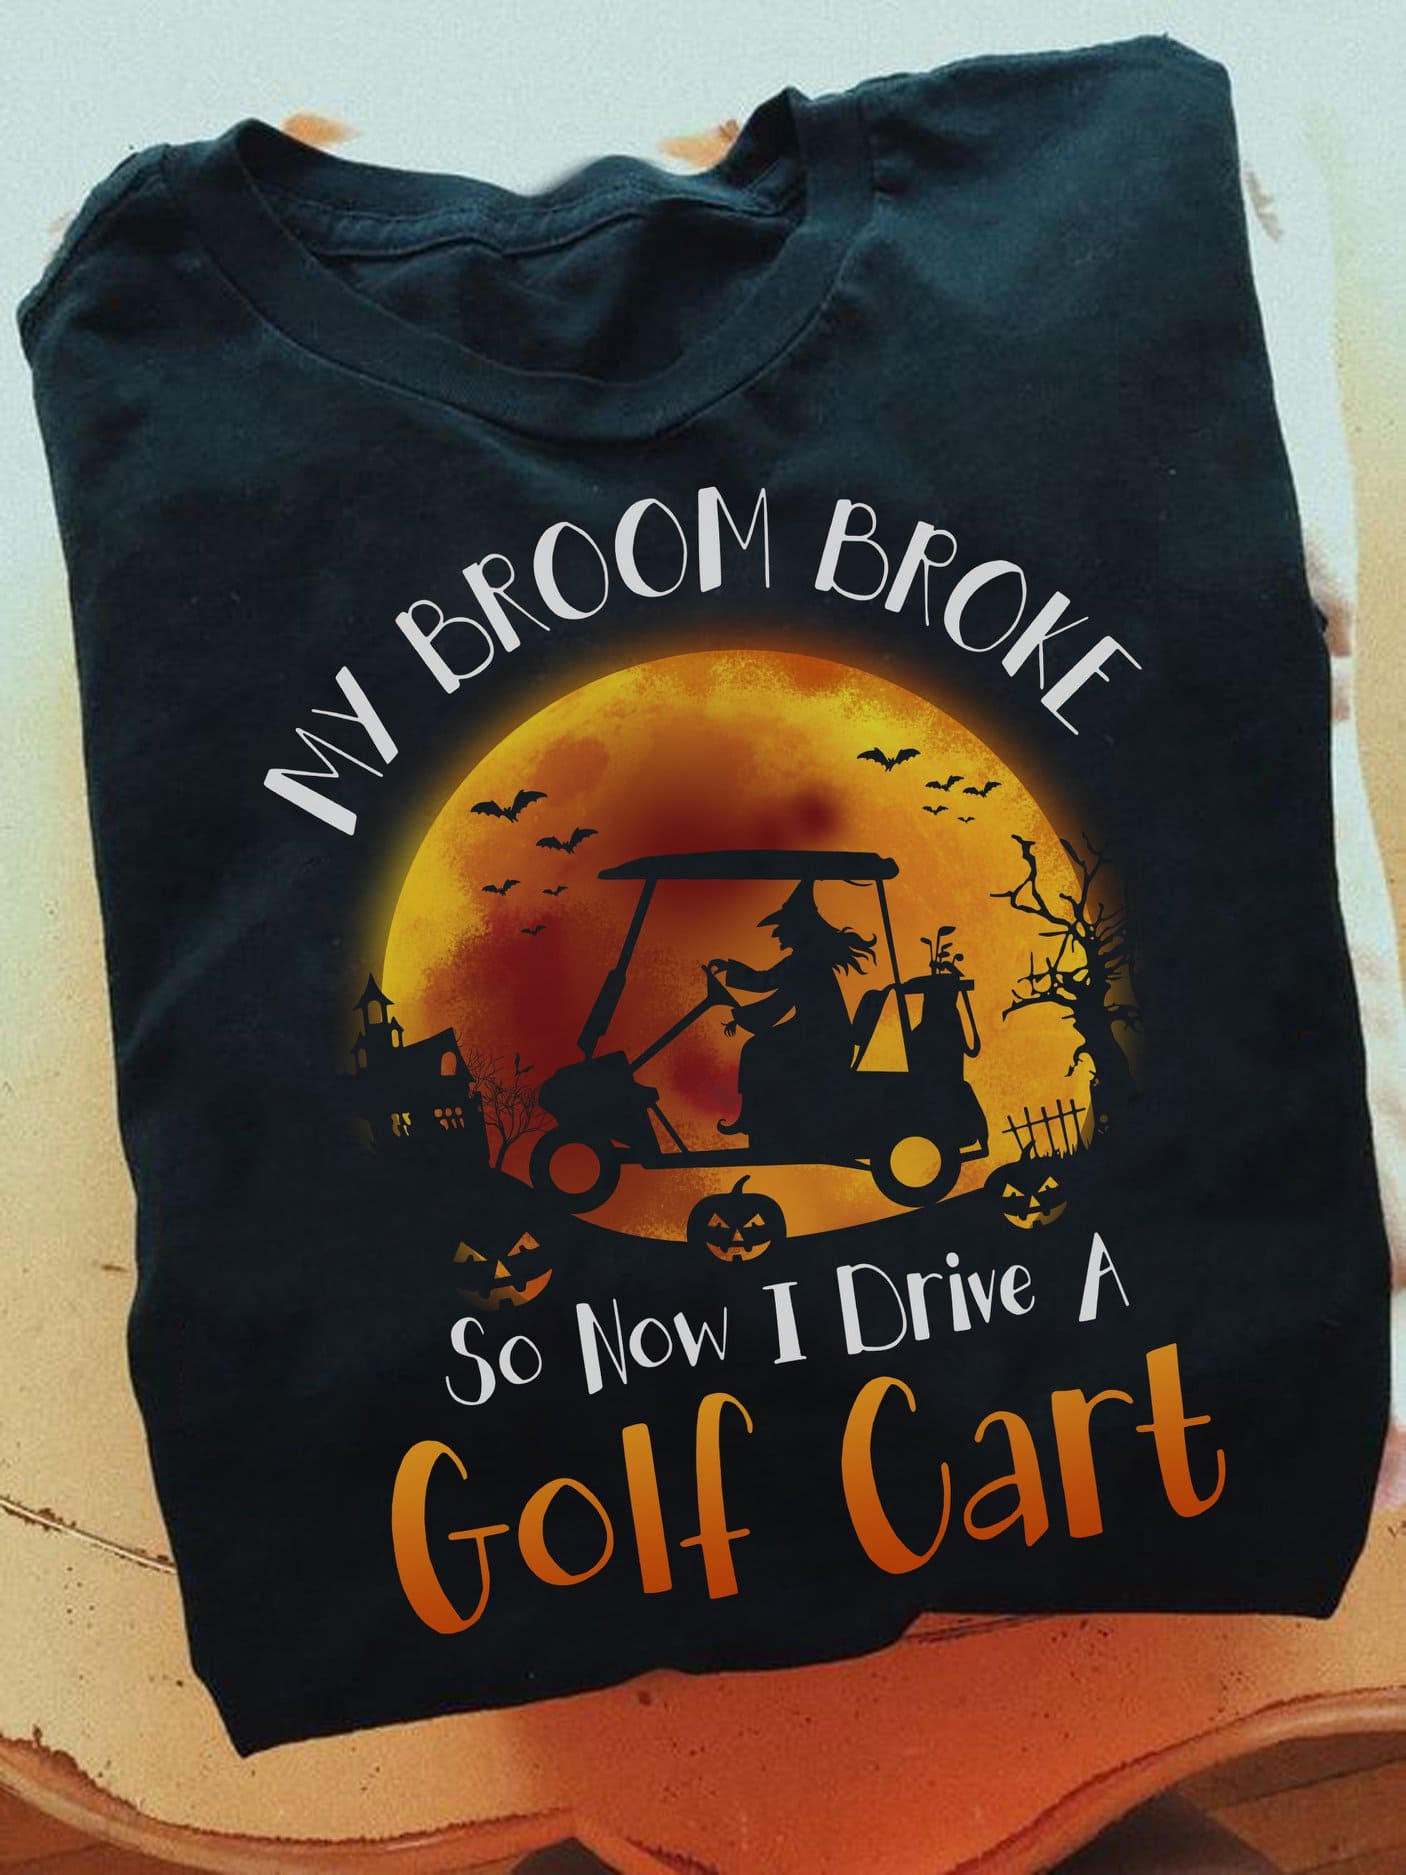 My broom broke so now I drive golf cart - Witch riding golf cart, Halloween gift for golfer